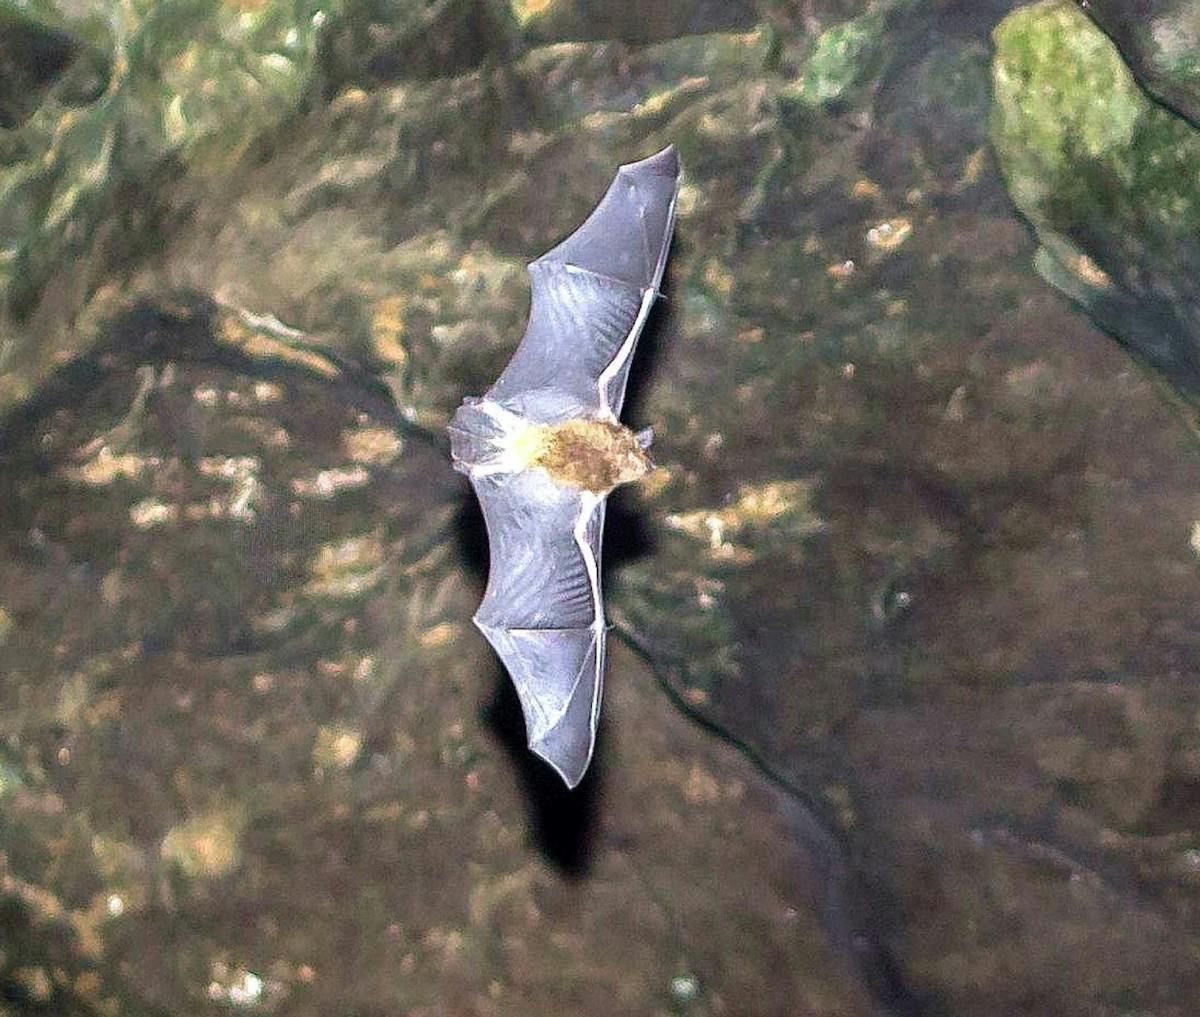 Gray bats are the ultimate planners when it comes to having young